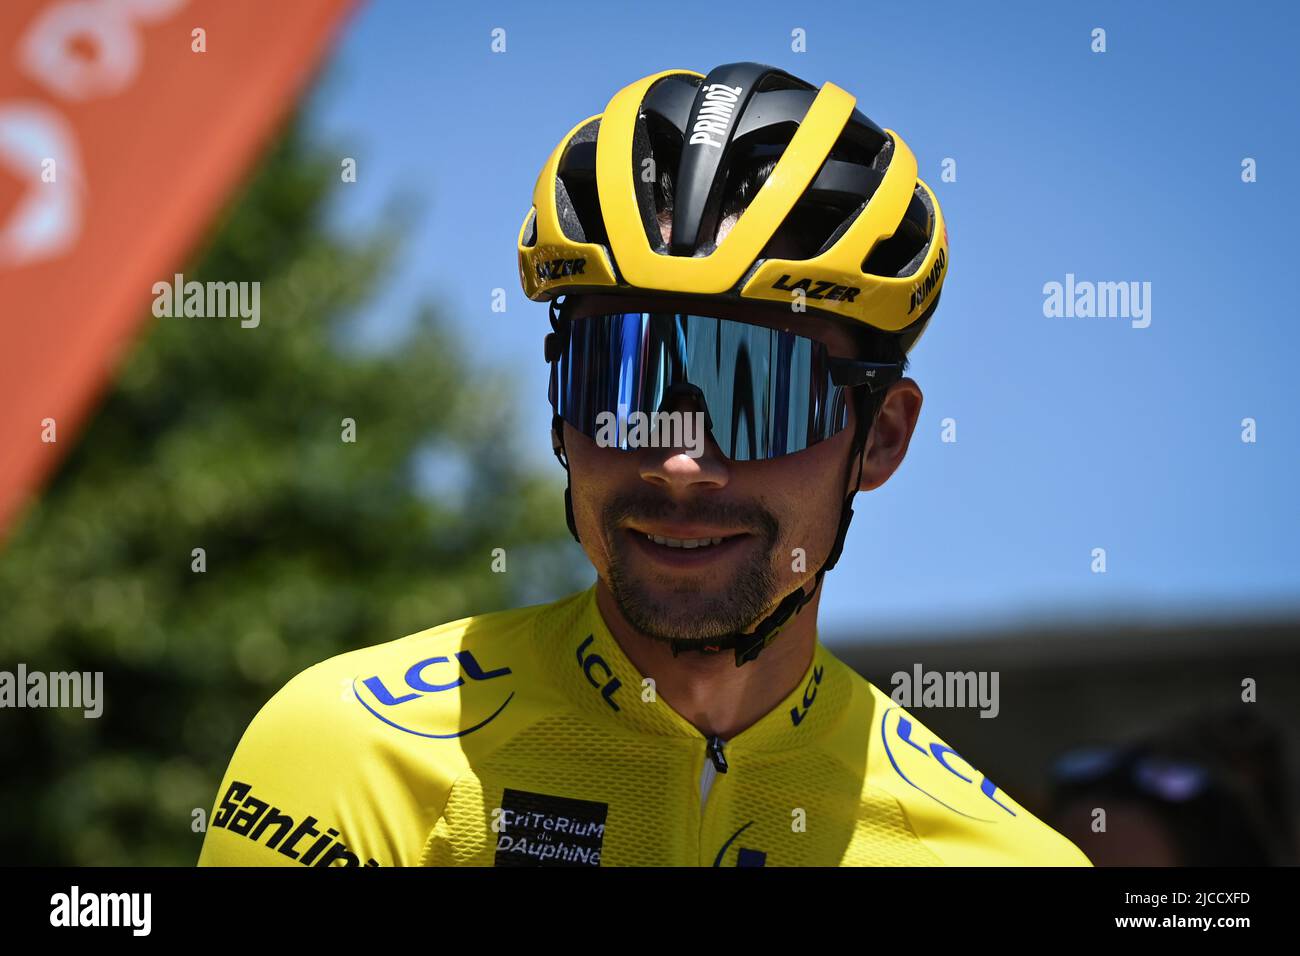 Slovenian Primoz Roglic of Jumbo-Visma wearing the yellow jersey at the start of the final stage of the Criterium du Dauphine cycling race, 139km from Saint-Alban-Leysse to Plateau de Solaison, France, Sunday 12 June 2022. BELGA PHOTO DAVID STOCKMAN Stock Photo